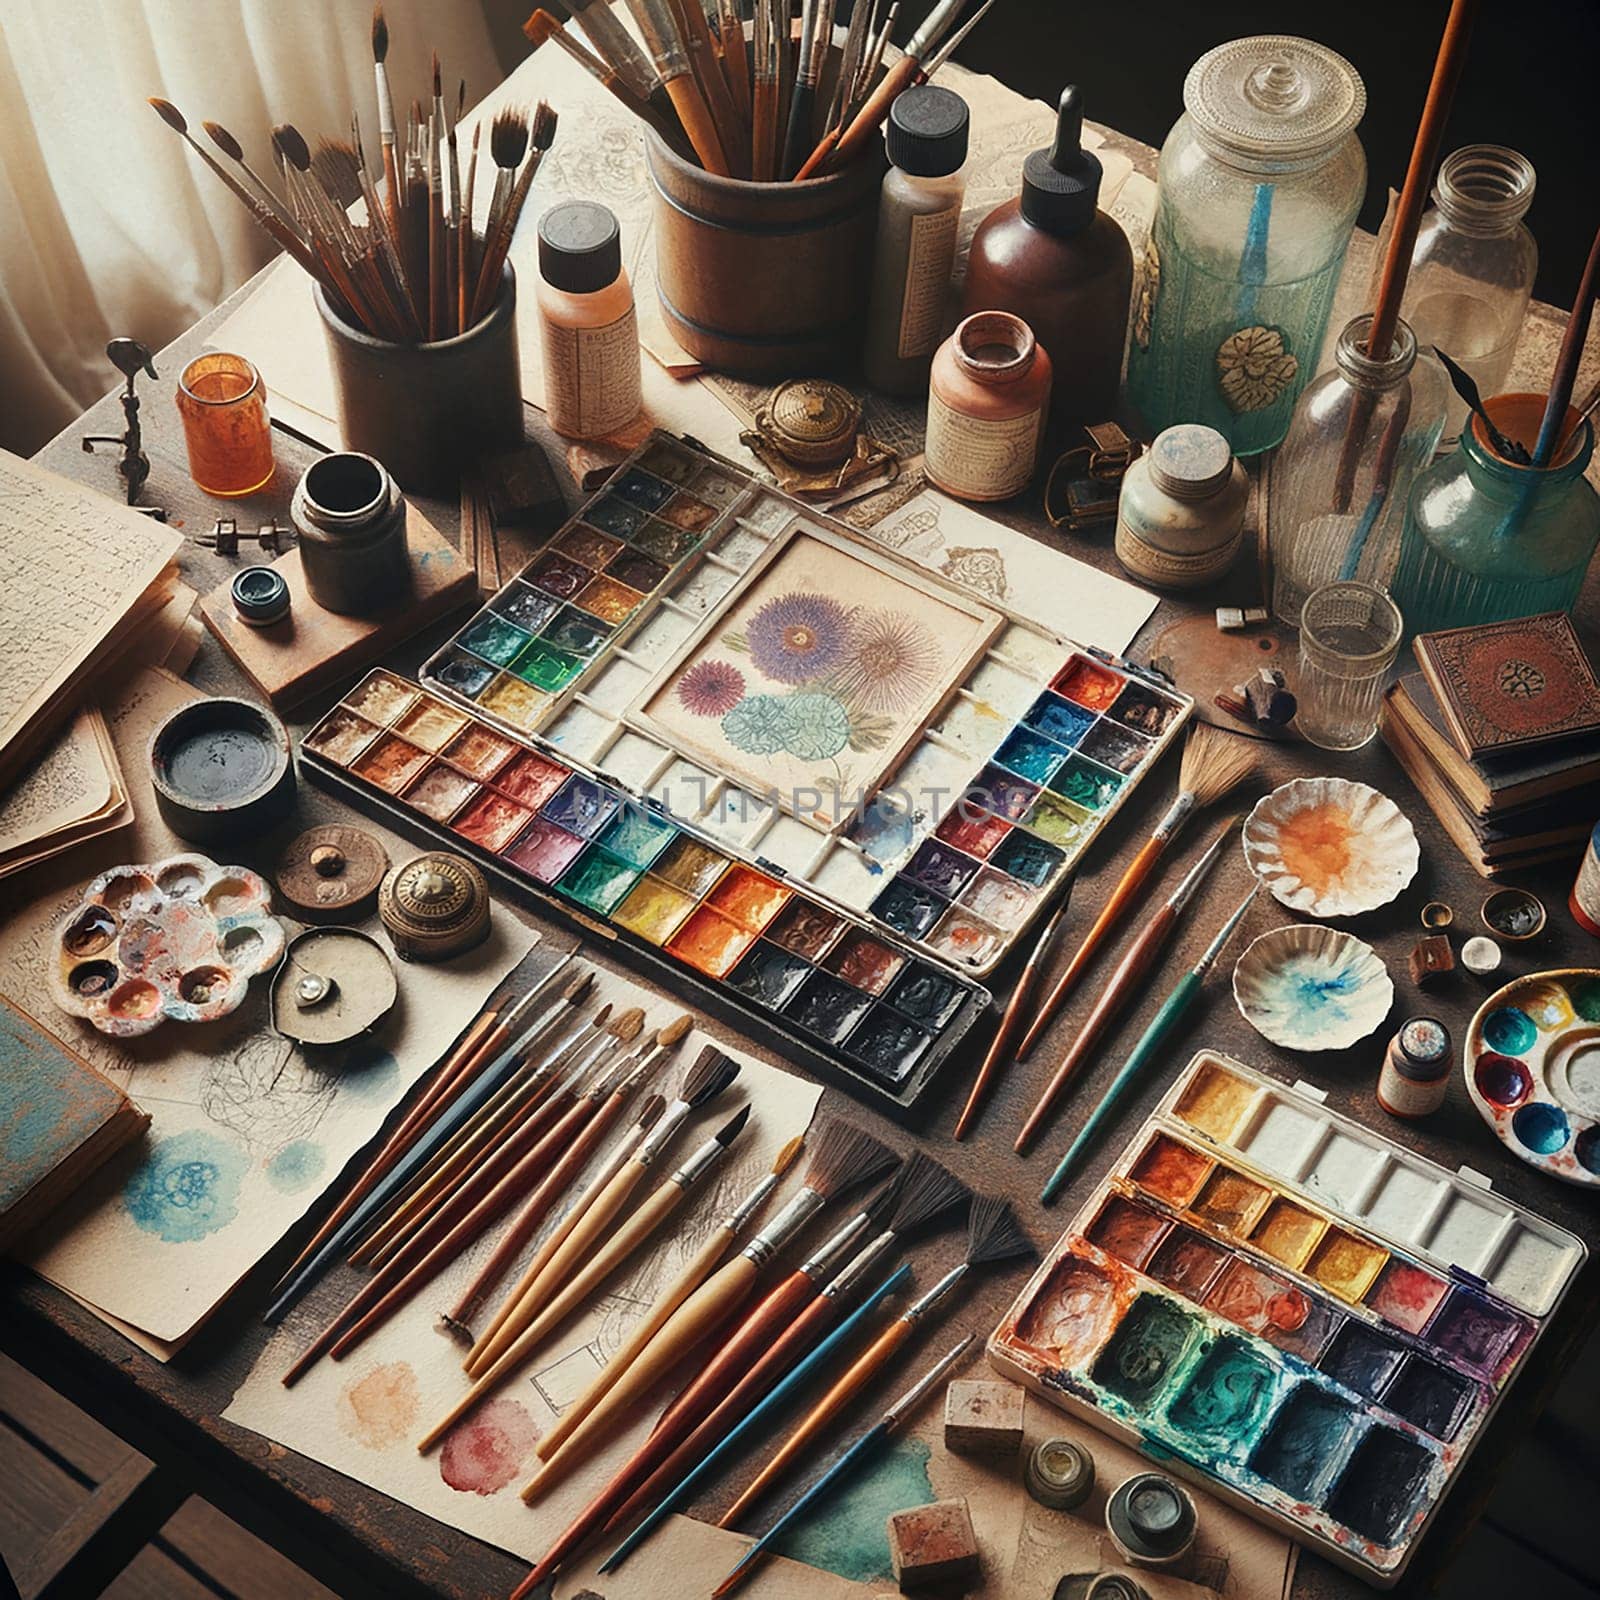 Inspired Workspace: Artistic Mock-up with Vintage Aesthetic by Petrichor